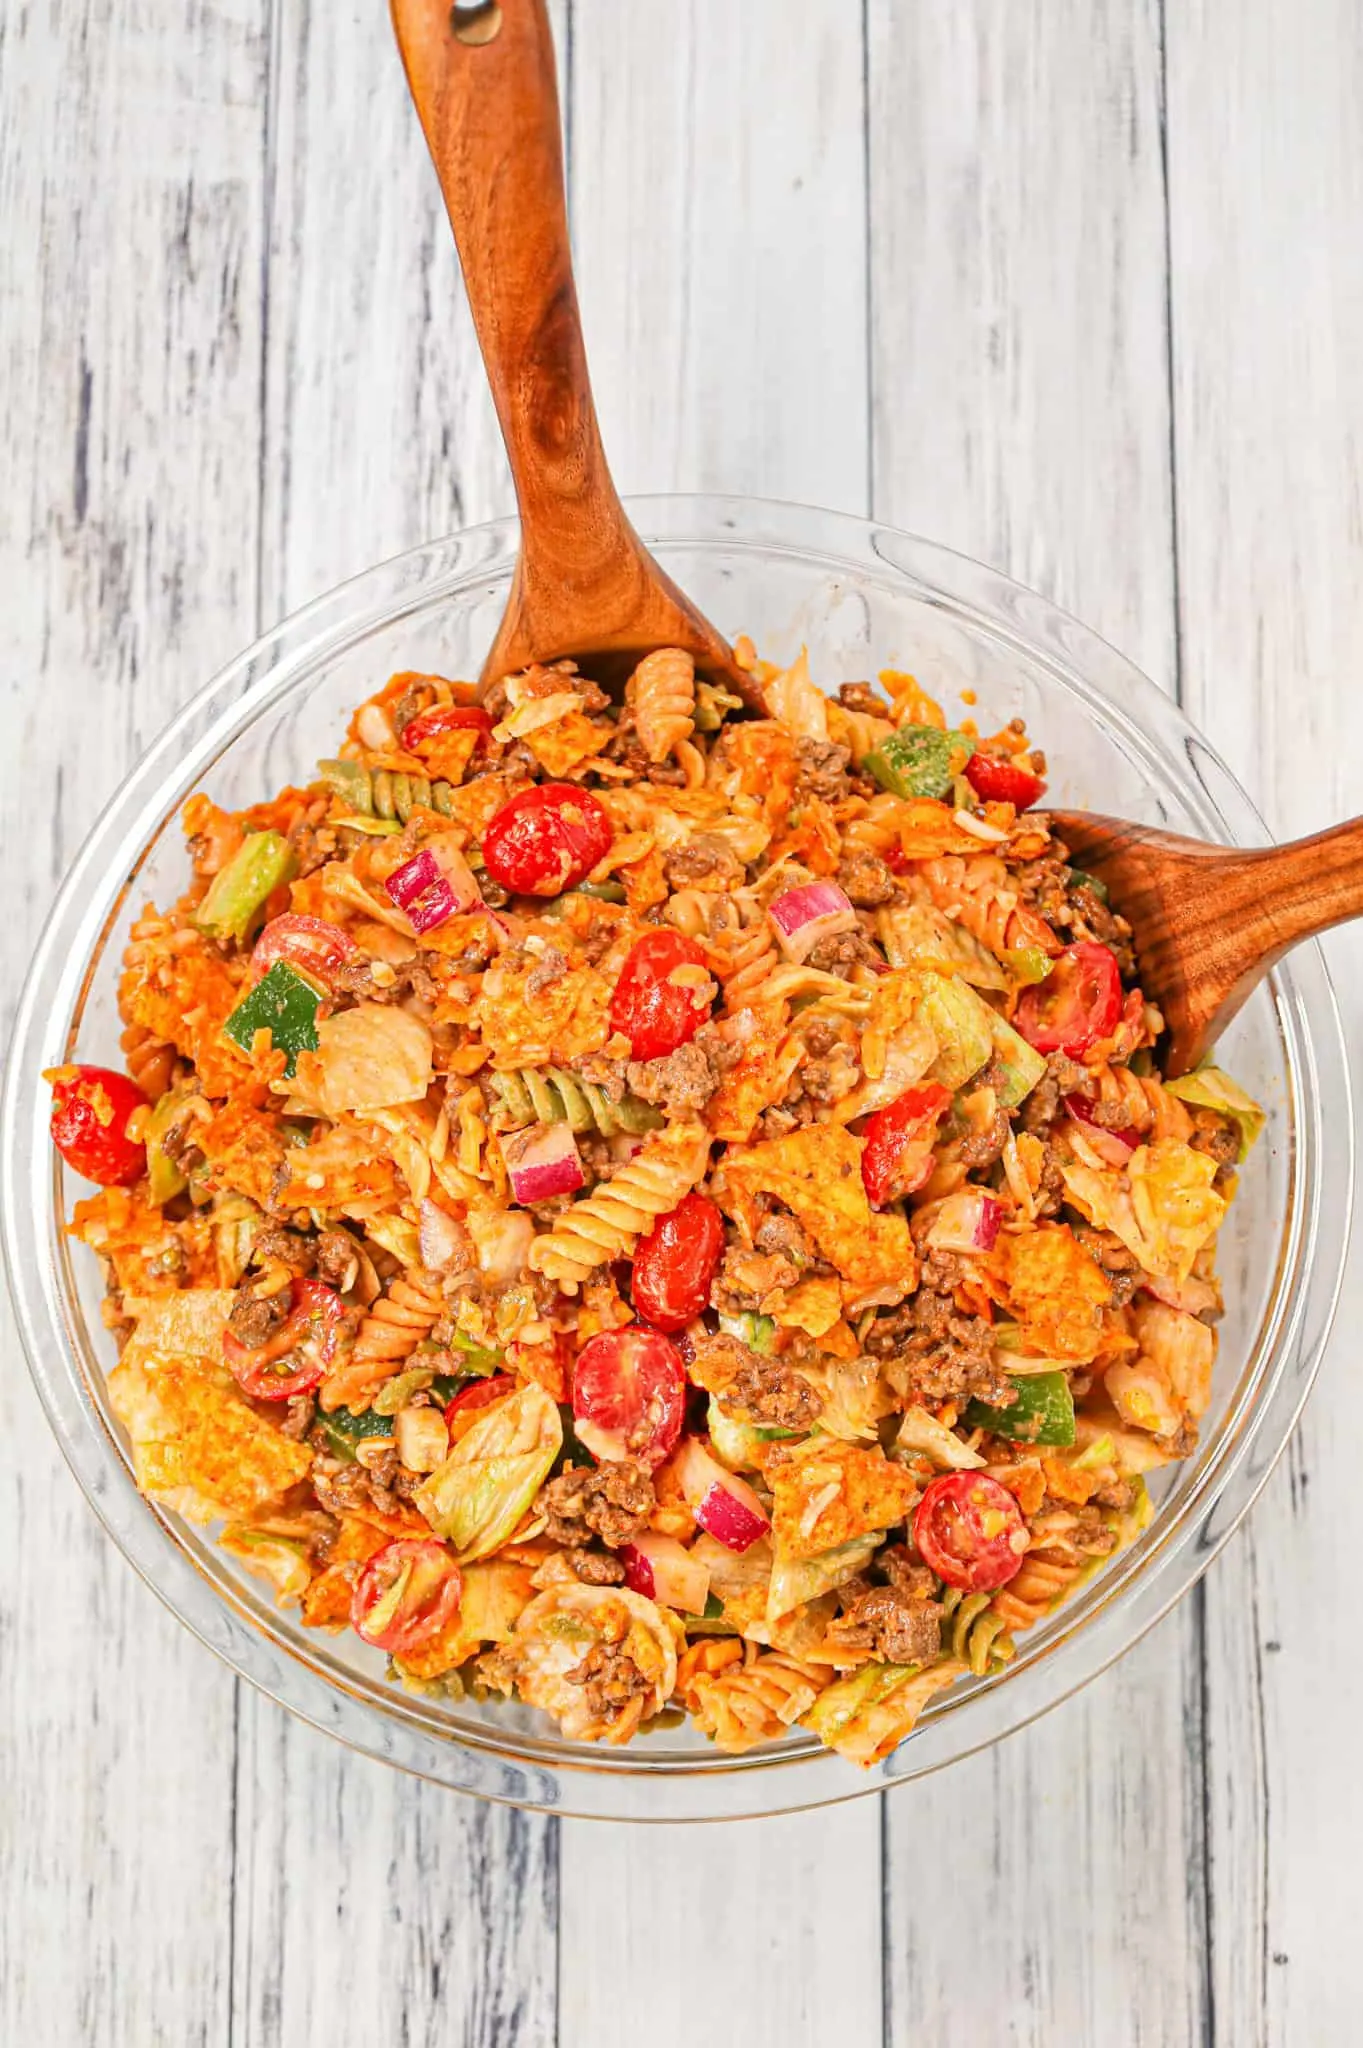 Taco Pasta Salad is the perfect party side dish loaded with tri-colour rotini pasta, taco seasoned ground beef, iceberg lettuce, onions, tomatoes, green peppers, shredded cheese, salsa, ranch dressing and crumbled Doritos nacho chips.